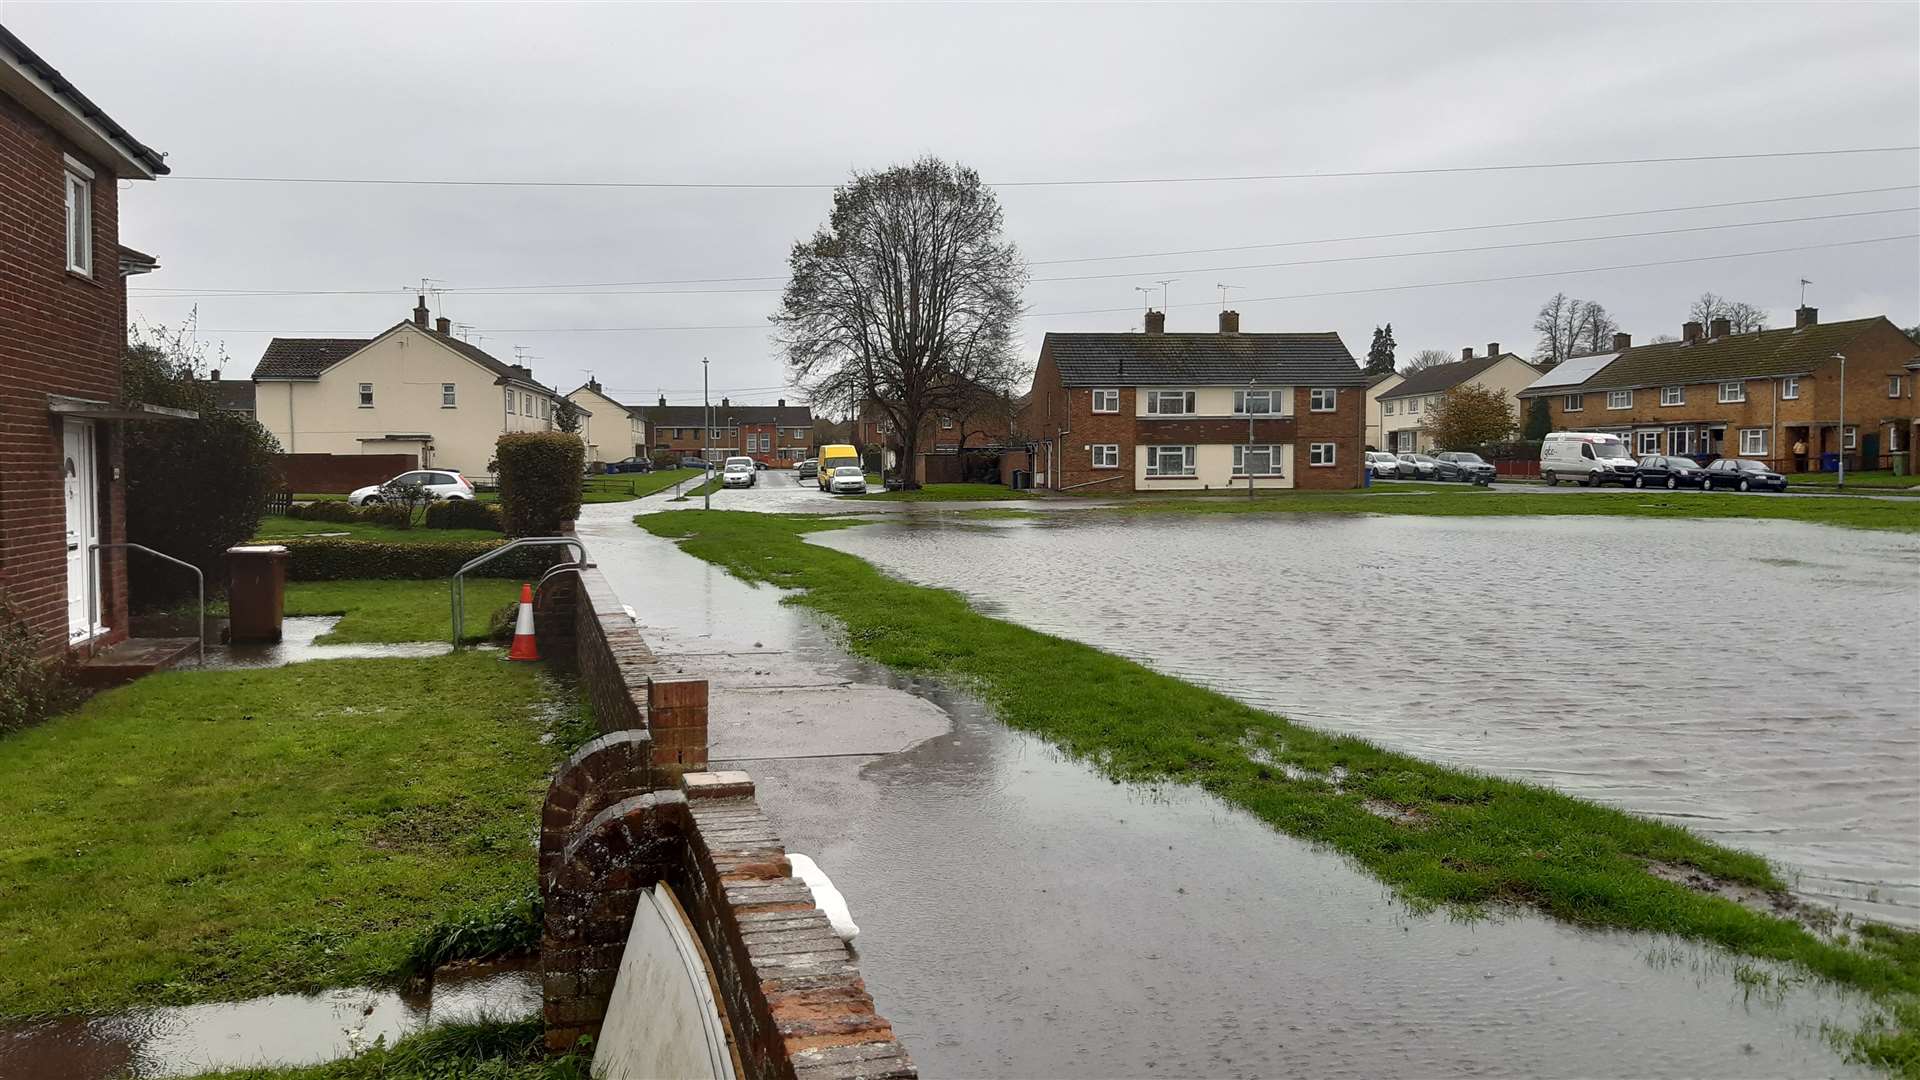 Canterbury Road, Sittingbourne, has experienced its worse flooding, according to one witness